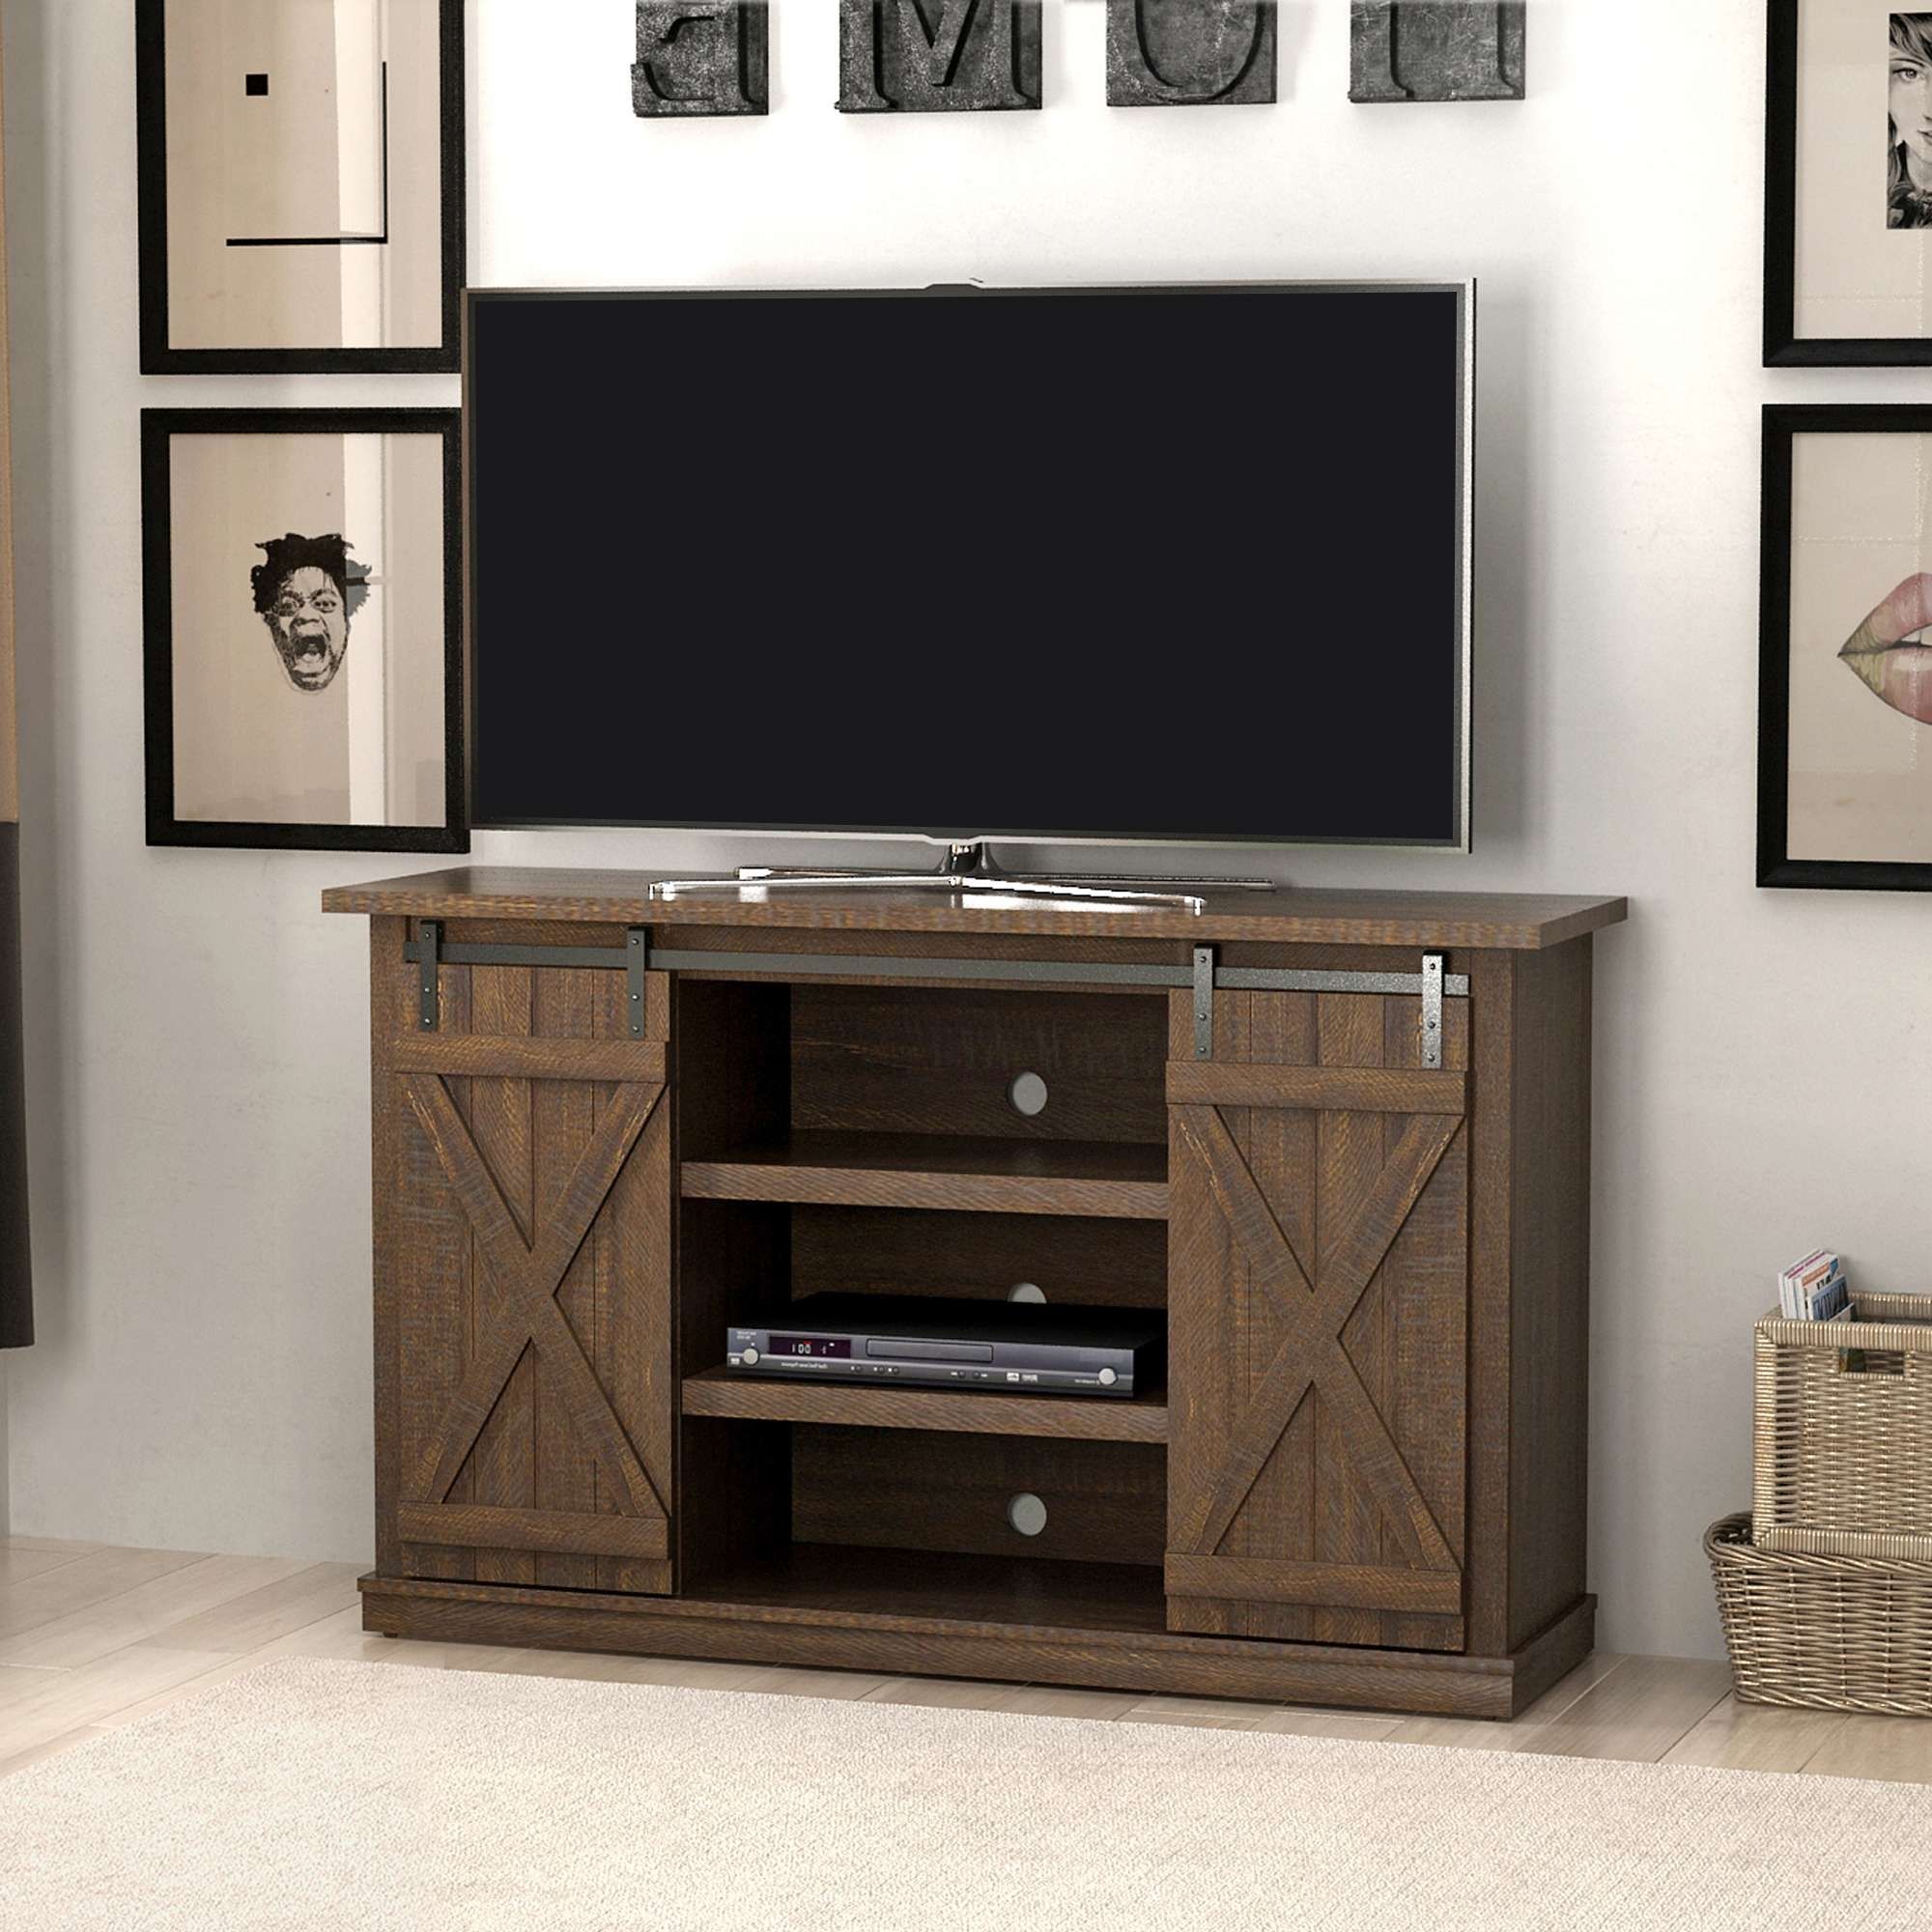 Tv Stands – Walmart For Upright Tv Stands (View 1 of 15)